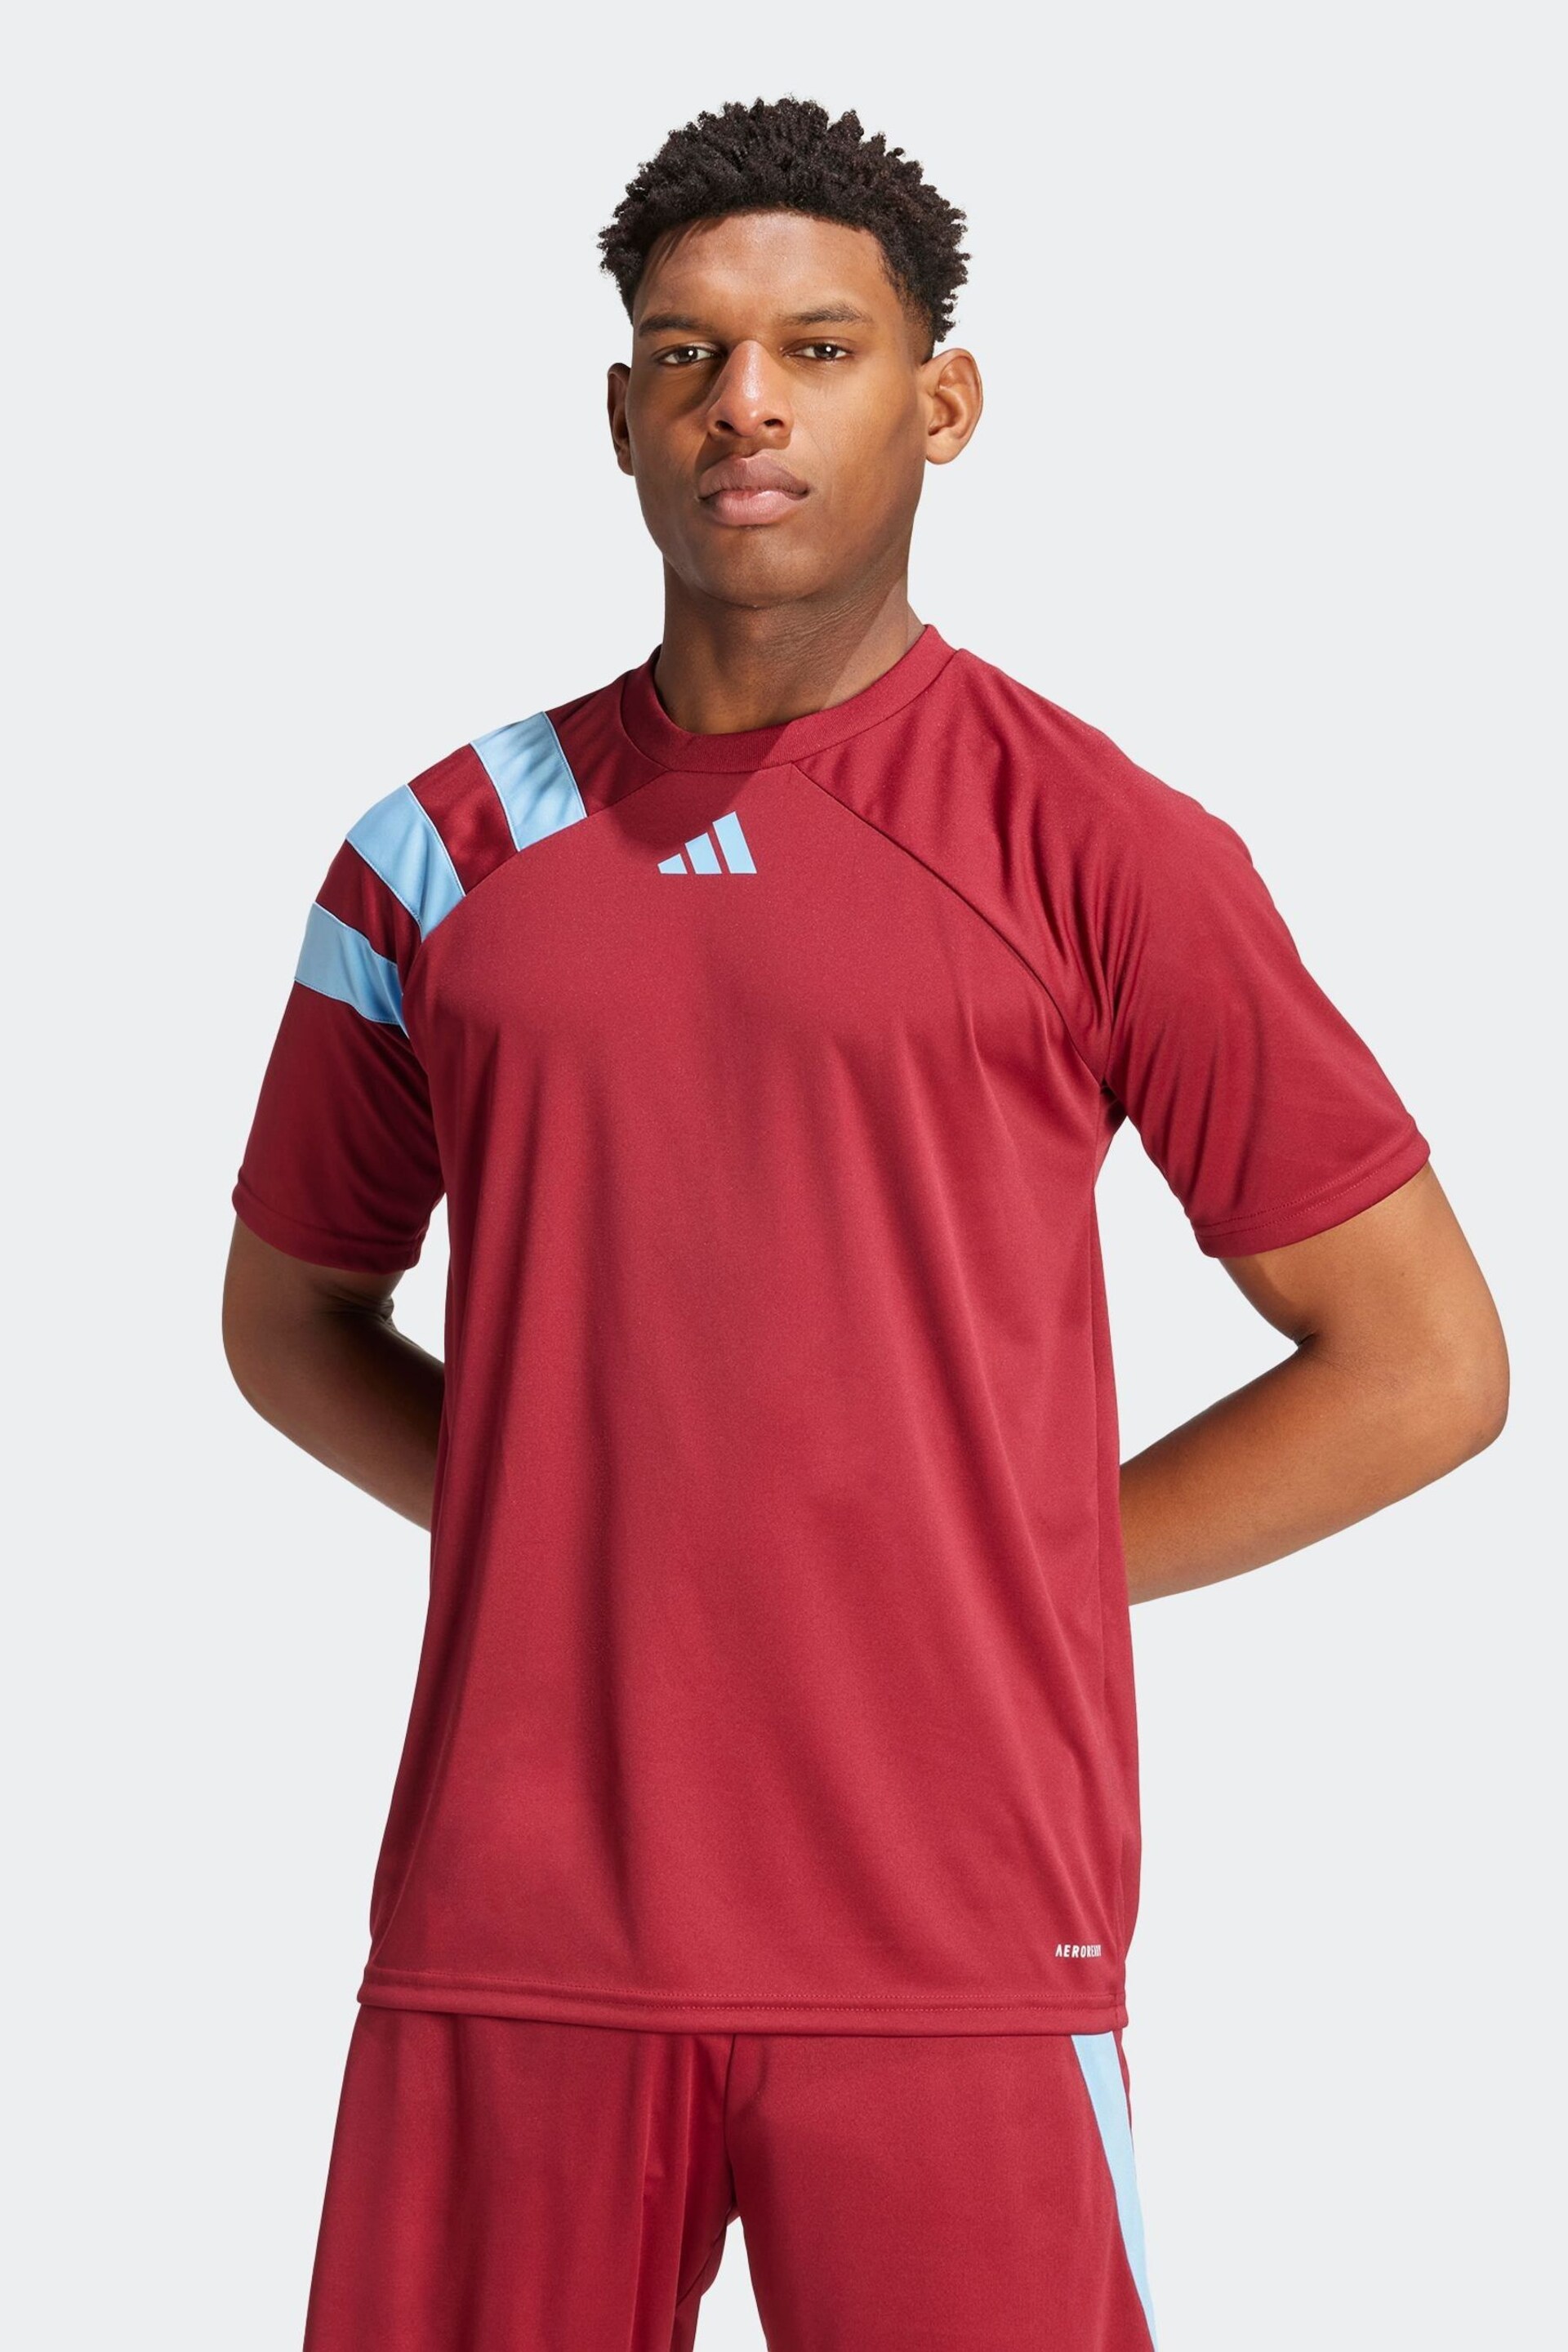 adidas Red/Blue Fortore 23 Jersey - Image 1 of 8